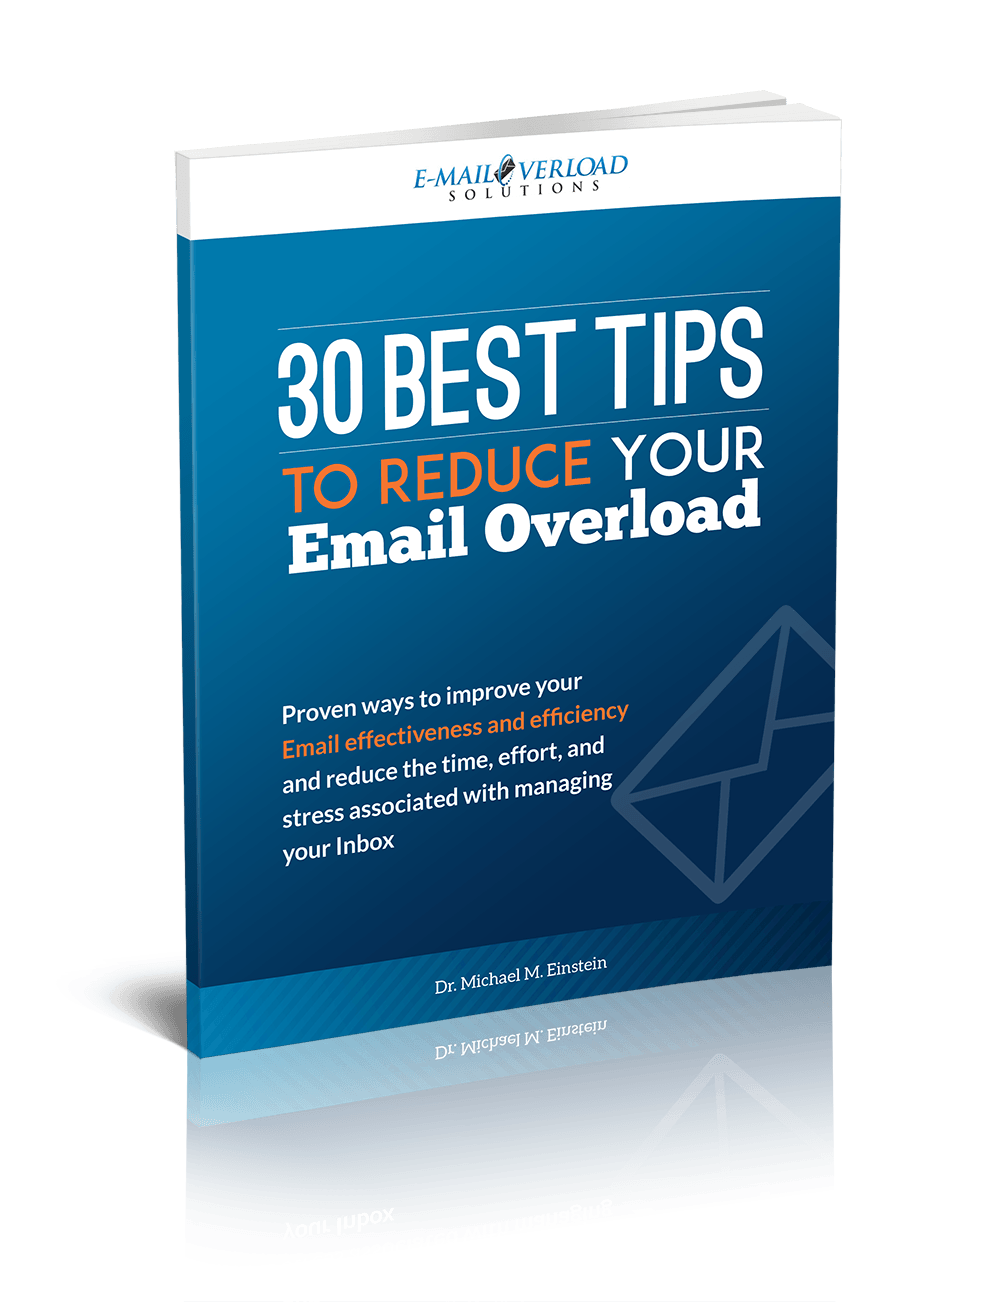 Email Overload Products Email Overload Solutions